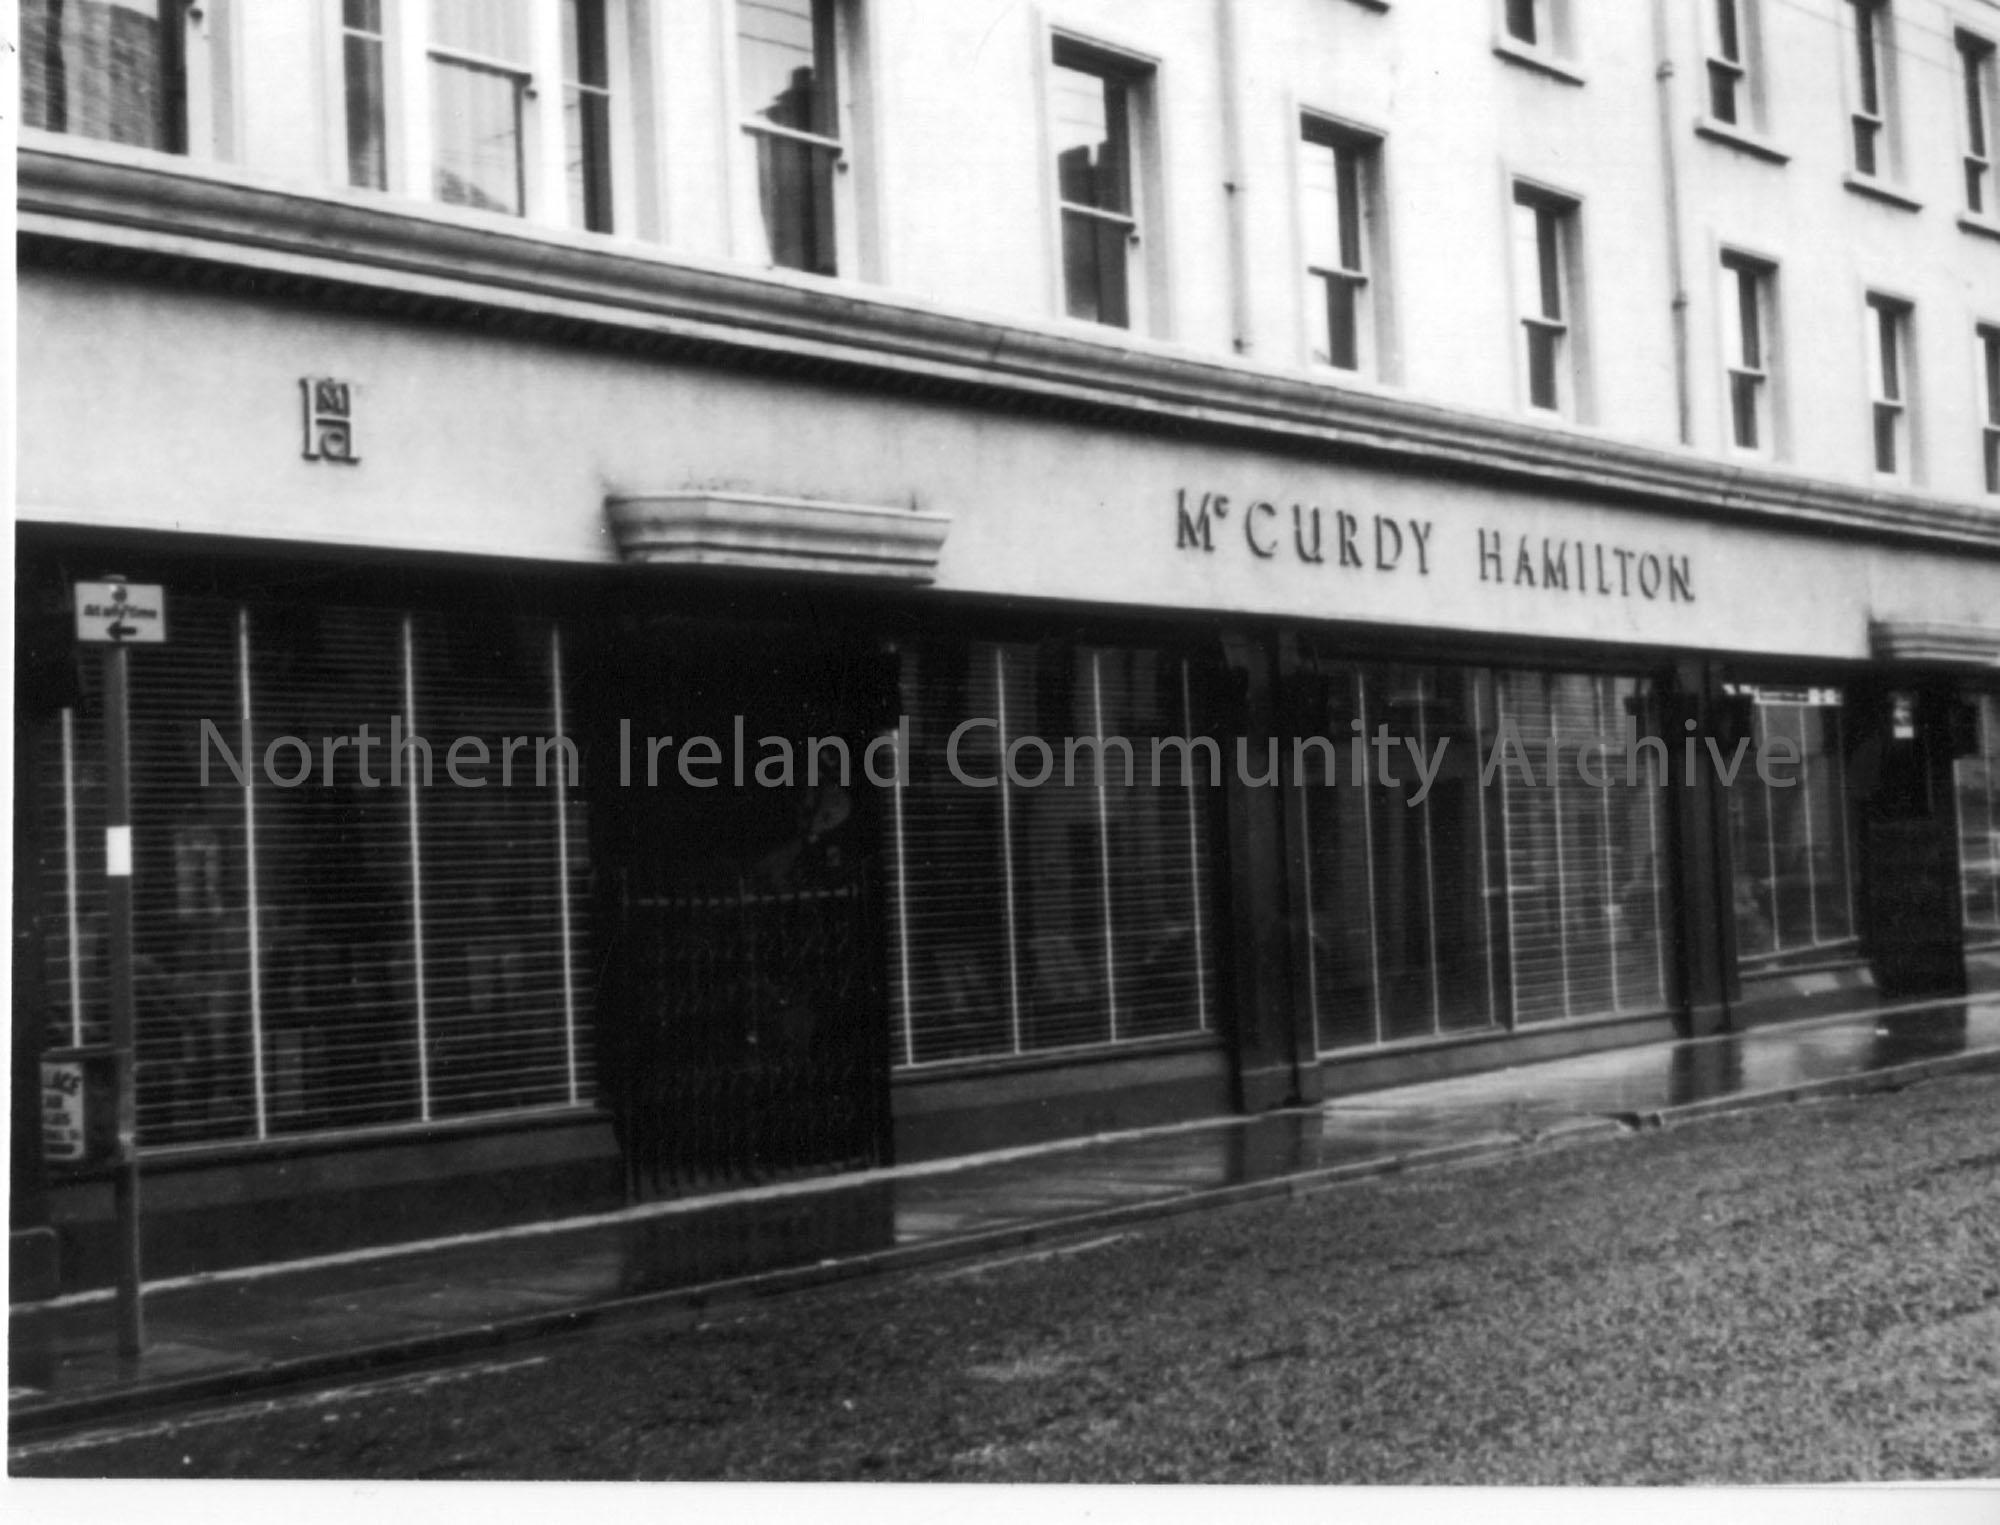 View of shop front, McCurdy Hamilton, Drapery store